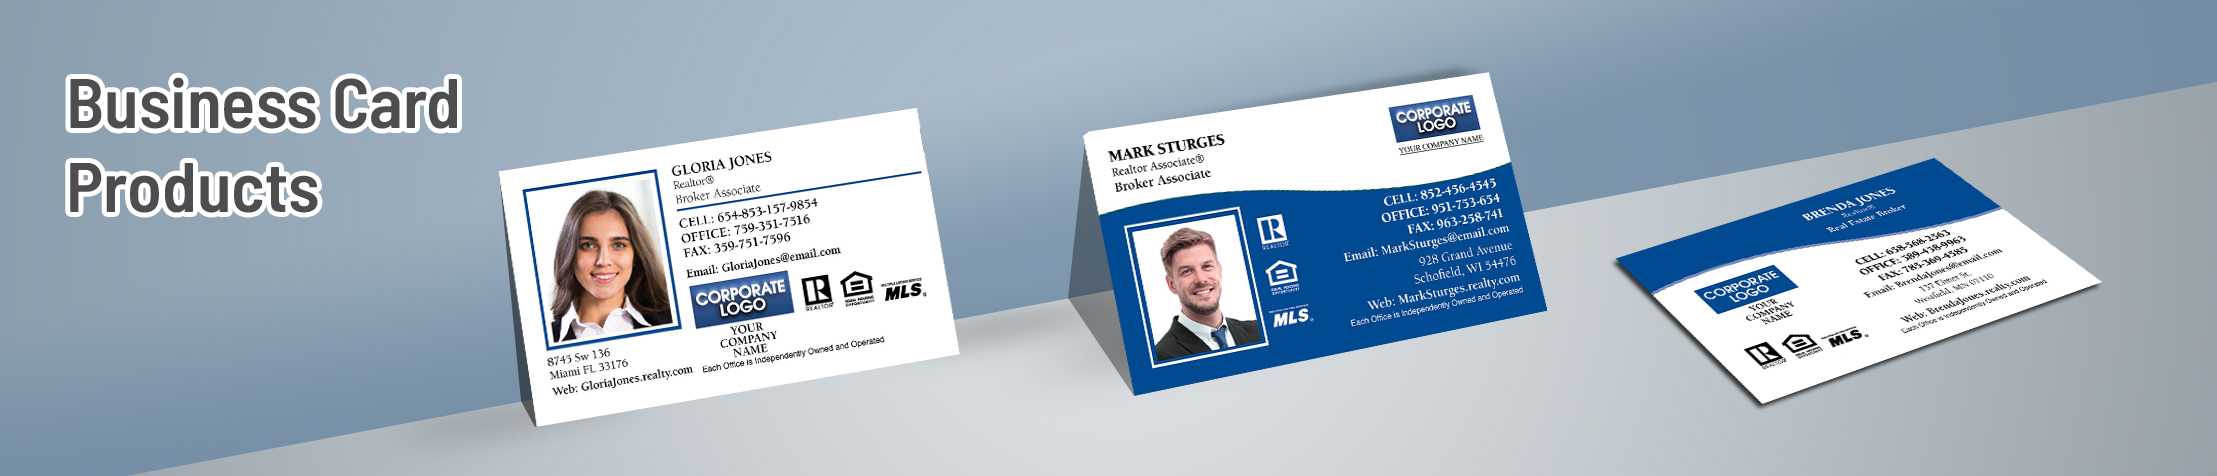 Coldwell Banker Real Estate Business Card Products - Unique, Custom Business Cards Printed on Quality Stock with Creative Designs for Realtors | Sparkprint.com